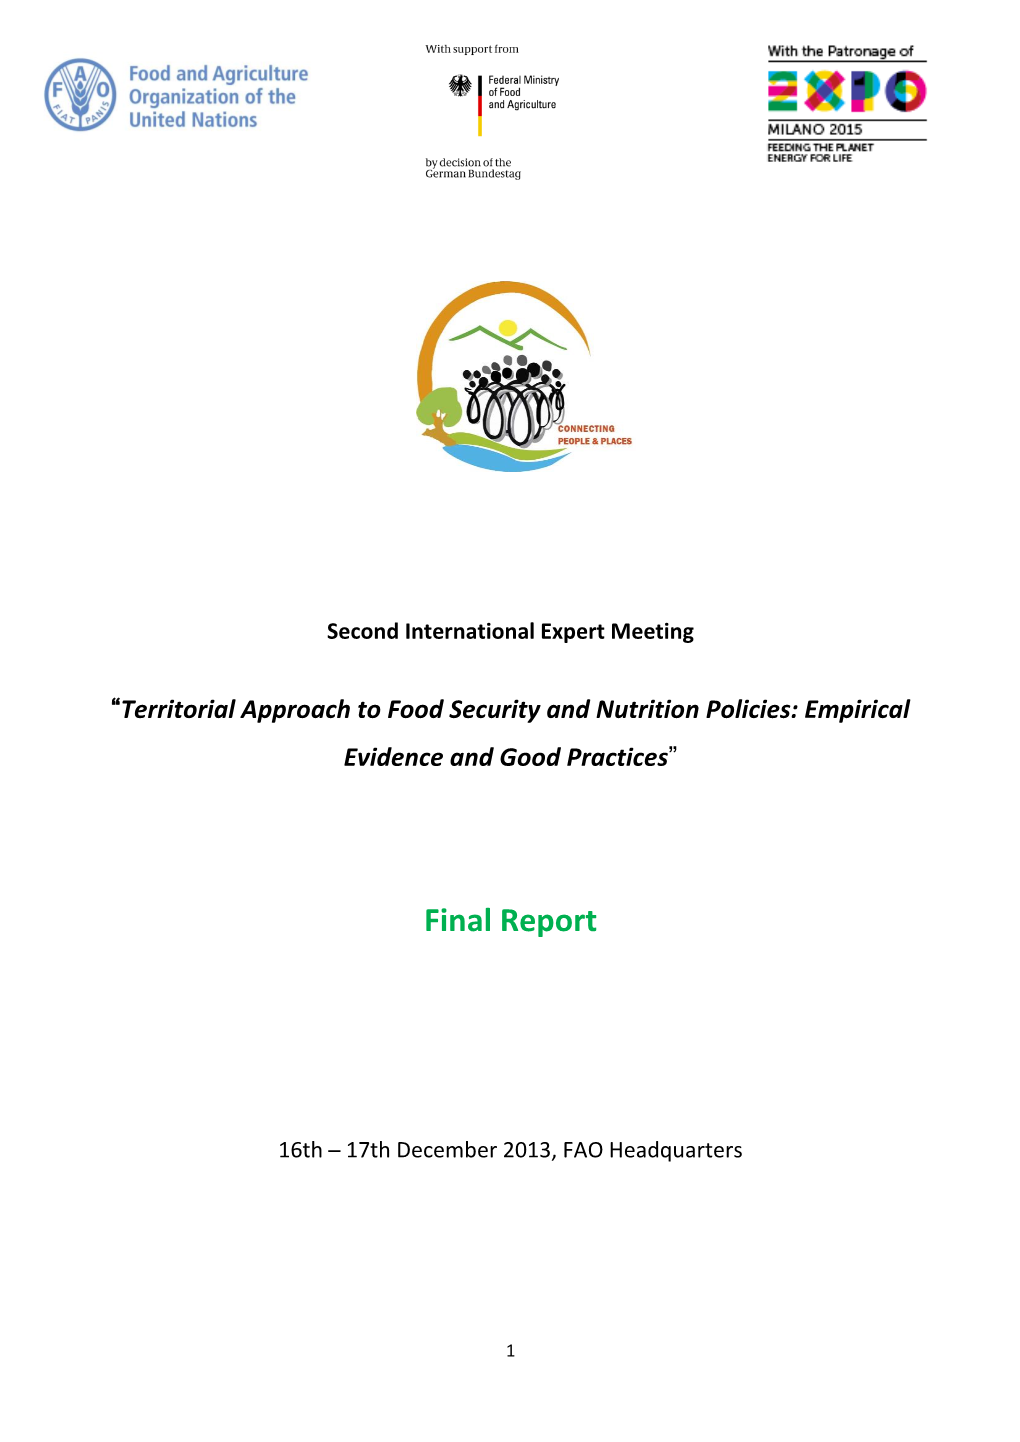 Territorial Approach to Food Security and Nutrition Policies: Empirical Evidence and Good Practices”